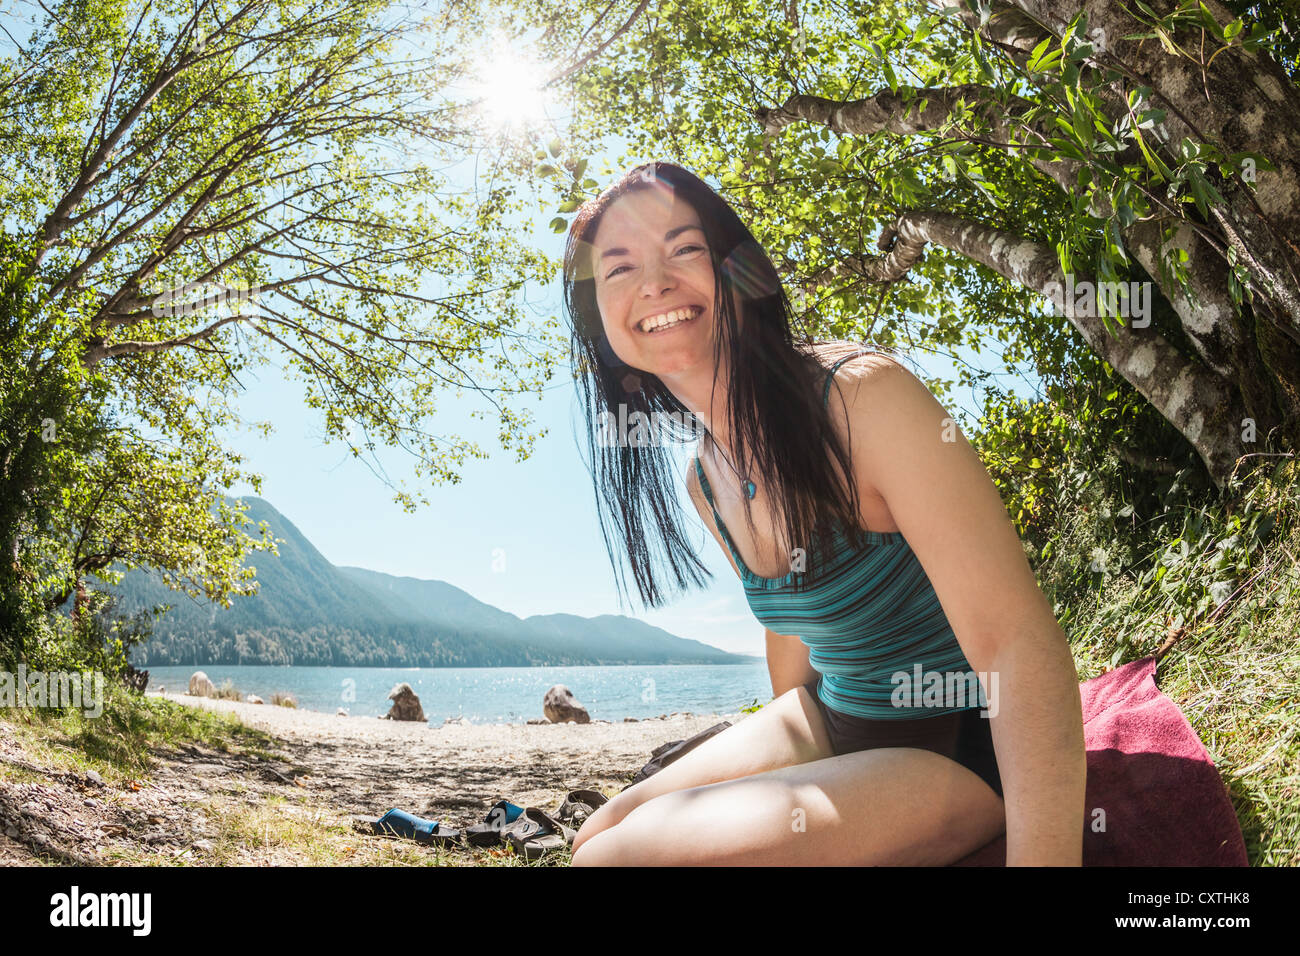 Smiling woman sitting by rural lake Banque D'Images